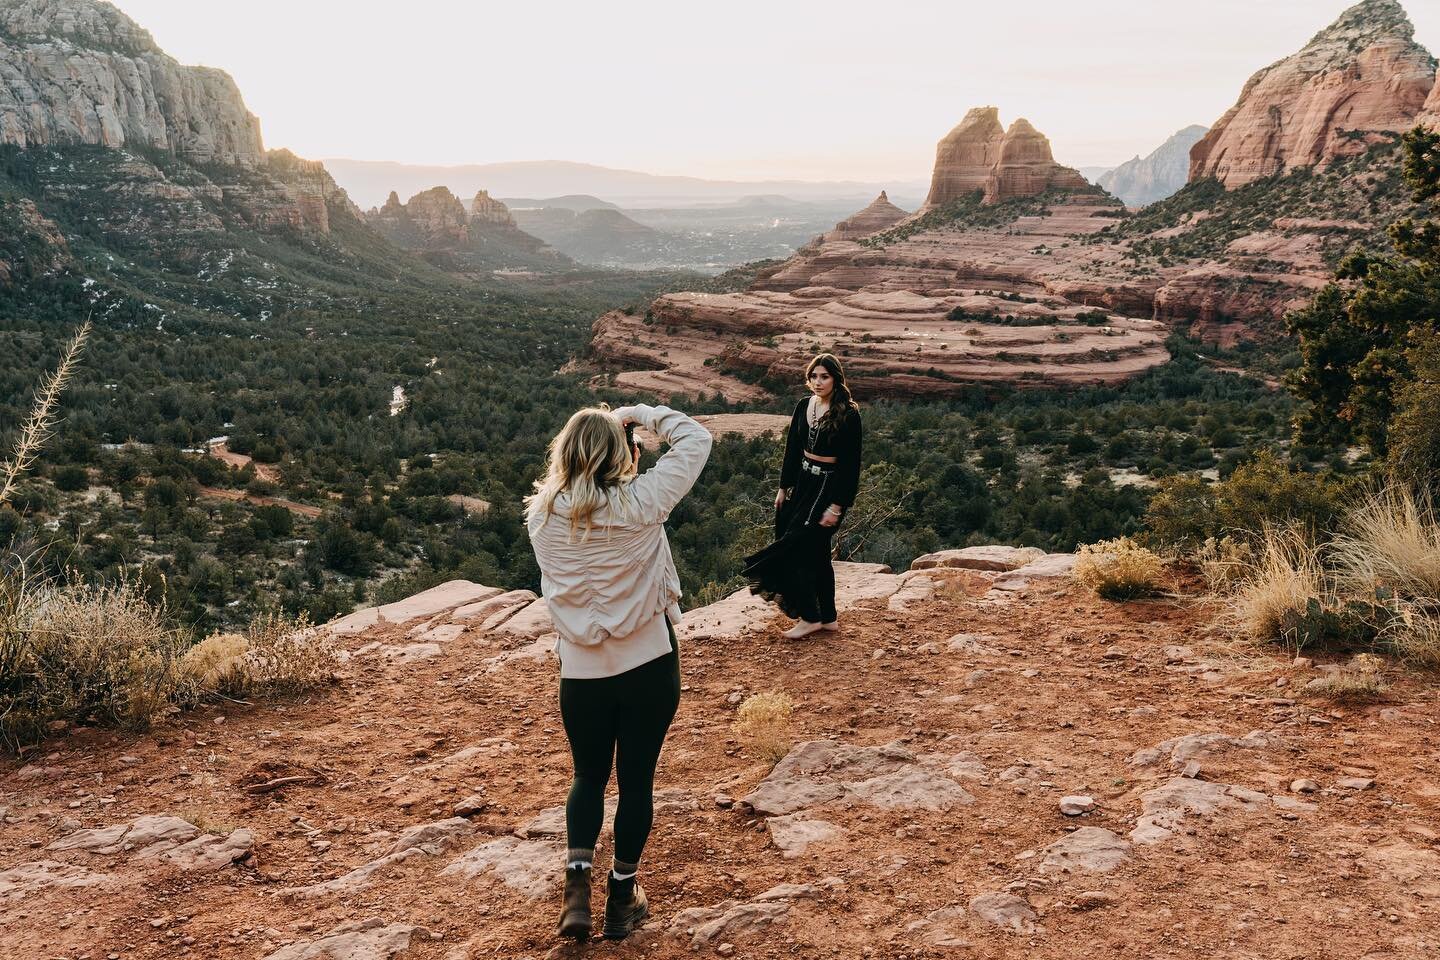 Here's a little BTS of me taking photos at a location that took 90 minutes of off-roading to get to. The views in Sedona are 🤌

📷: @justdaleit